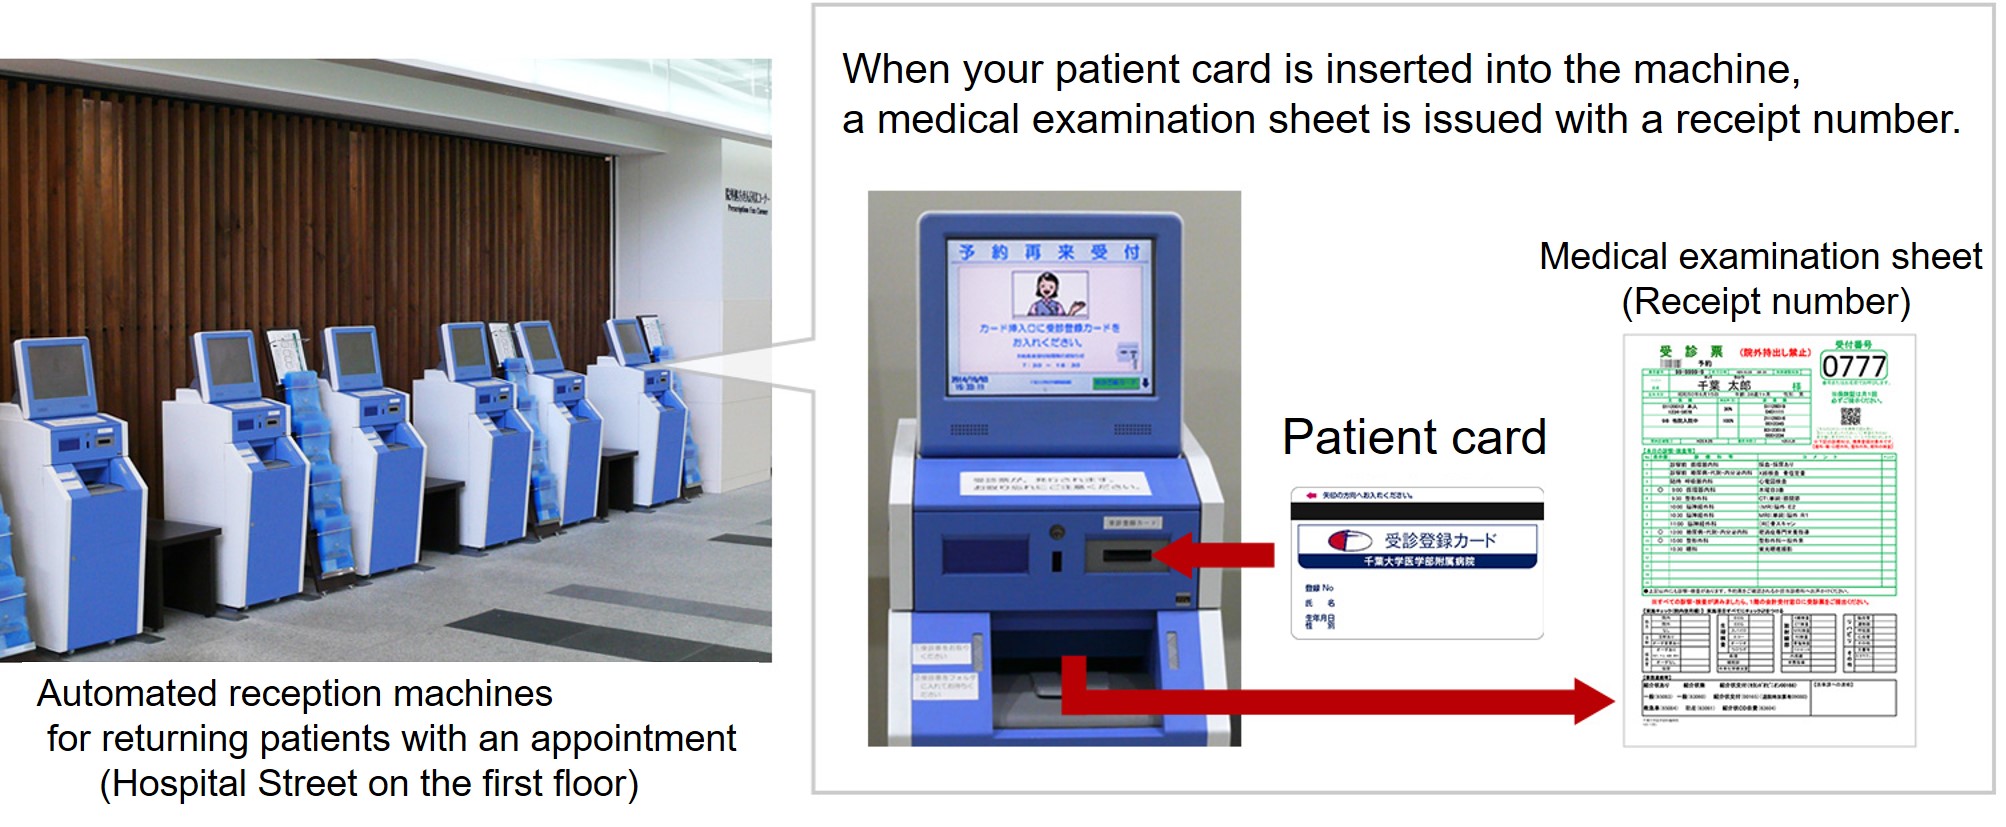 When your patient card is inserted into the machine, a medical examination sheet is issued with a receipt number.